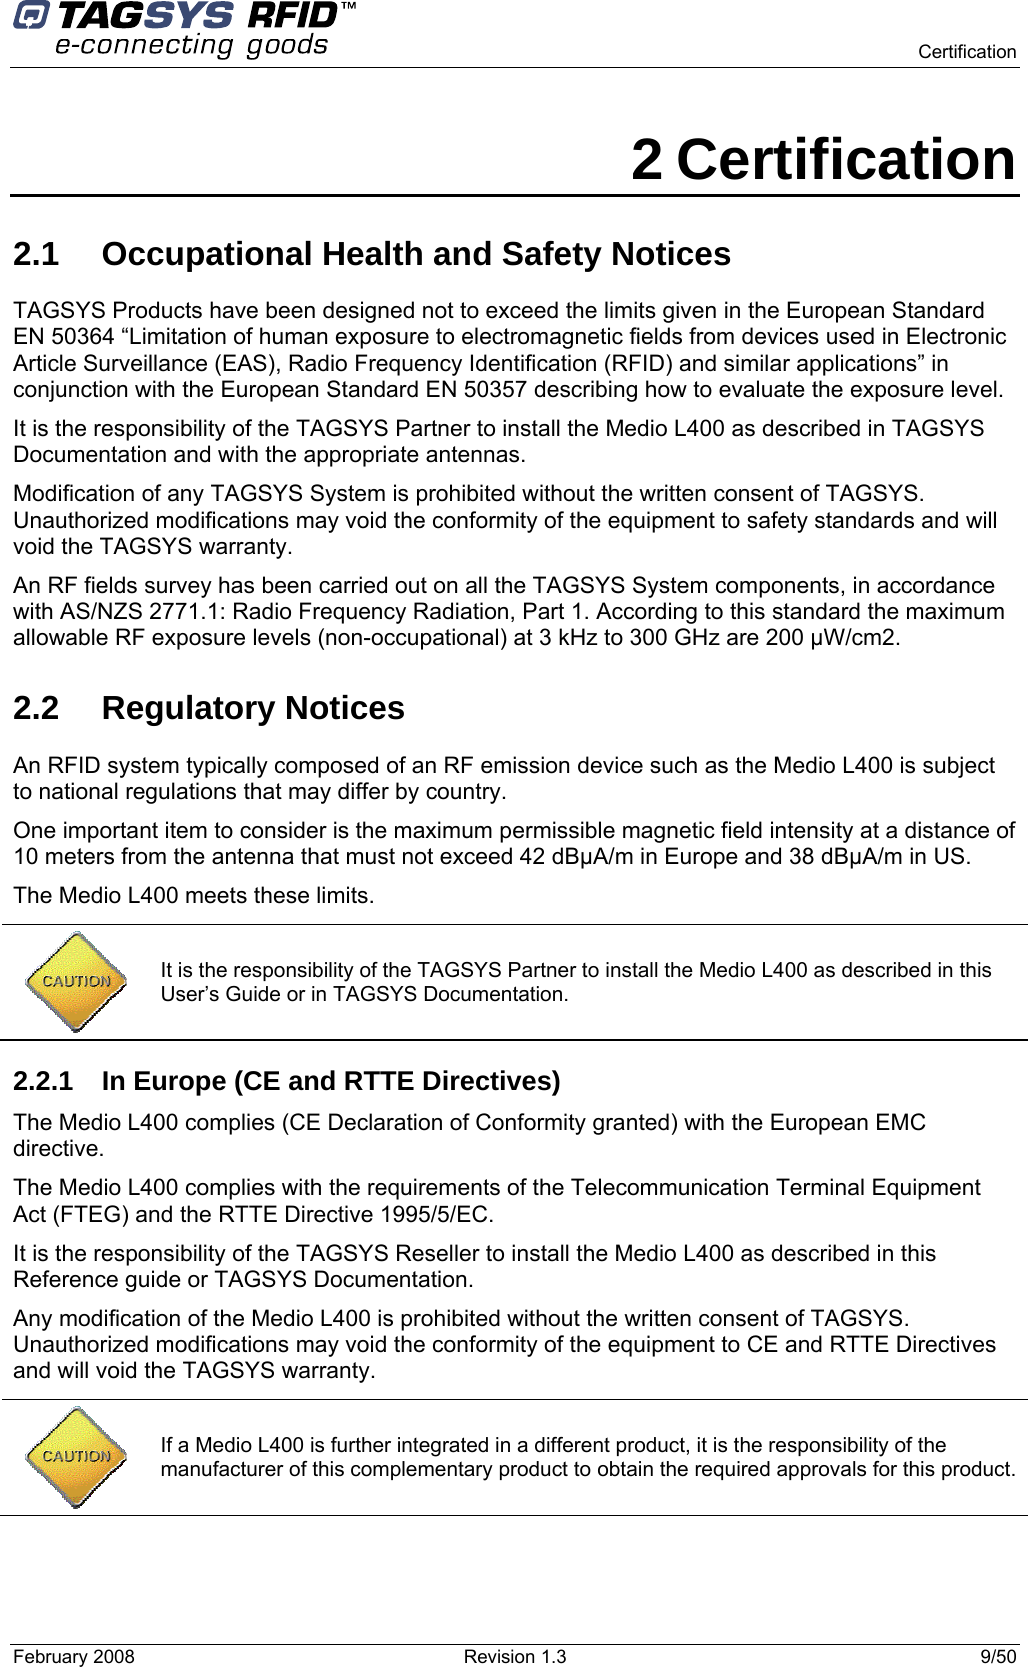      Certification February 2008  Revision 1.3  9/50  2 Certification 2.1  Occupational Health and Safety Notices TAGSYS Products have been designed not to exceed the limits given in the European Standard EN 50364 “Limitation of human exposure to electromagnetic fields from devices used in Electronic Article Surveillance (EAS), Radio Frequency Identification (RFID) and similar applications” in conjunction with the European Standard EN 50357 describing how to evaluate the exposure level. It is the responsibility of the TAGSYS Partner to install the Medio L400 as described in TAGSYS Documentation and with the appropriate antennas.  Modification of any TAGSYS System is prohibited without the written consent of TAGSYS. Unauthorized modifications may void the conformity of the equipment to safety standards and will void the TAGSYS warranty. An RF fields survey has been carried out on all the TAGSYS System components, in accordance with AS/NZS 2771.1: Radio Frequency Radiation, Part 1. According to this standard the maximum allowable RF exposure levels (non-occupational) at 3 kHz to 300 GHz are 200 µW/cm2.  2.2 Regulatory Notices An RFID system typically composed of an RF emission device such as the Medio L400 is subject to national regulations that may differ by country. One important item to consider is the maximum permissible magnetic field intensity at a distance of 10 meters from the antenna that must not exceed 42 dBµA/m in Europe and 38 dBµA/m in US. The Medio L400 meets these limits.  2.2.1  In Europe (CE and RTTE Directives)  The Medio L400 complies (CE Declaration of Conformity granted) with the European EMC directive. The Medio L400 complies with the requirements of the Telecommunication Terminal Equipment Act (FTEG) and the RTTE Directive 1995/5/EC. It is the responsibility of the TAGSYS Reseller to install the Medio L400 as described in this Reference guide or TAGSYS Documentation. Any modification of the Medio L400 is prohibited without the written consent of TAGSYS. Unauthorized modifications may void the conformity of the equipment to CE and RTTE Directives and will void the TAGSYS warranty.   It is the responsibility of the TAGSYS Partner to install the Medio L400 as described in this User’s Guide or in TAGSYS Documentation.  If a Medio L400 is further integrated in a different product, it is the responsibility of the manufacturer of this complementary product to obtain the required approvals for this product. 